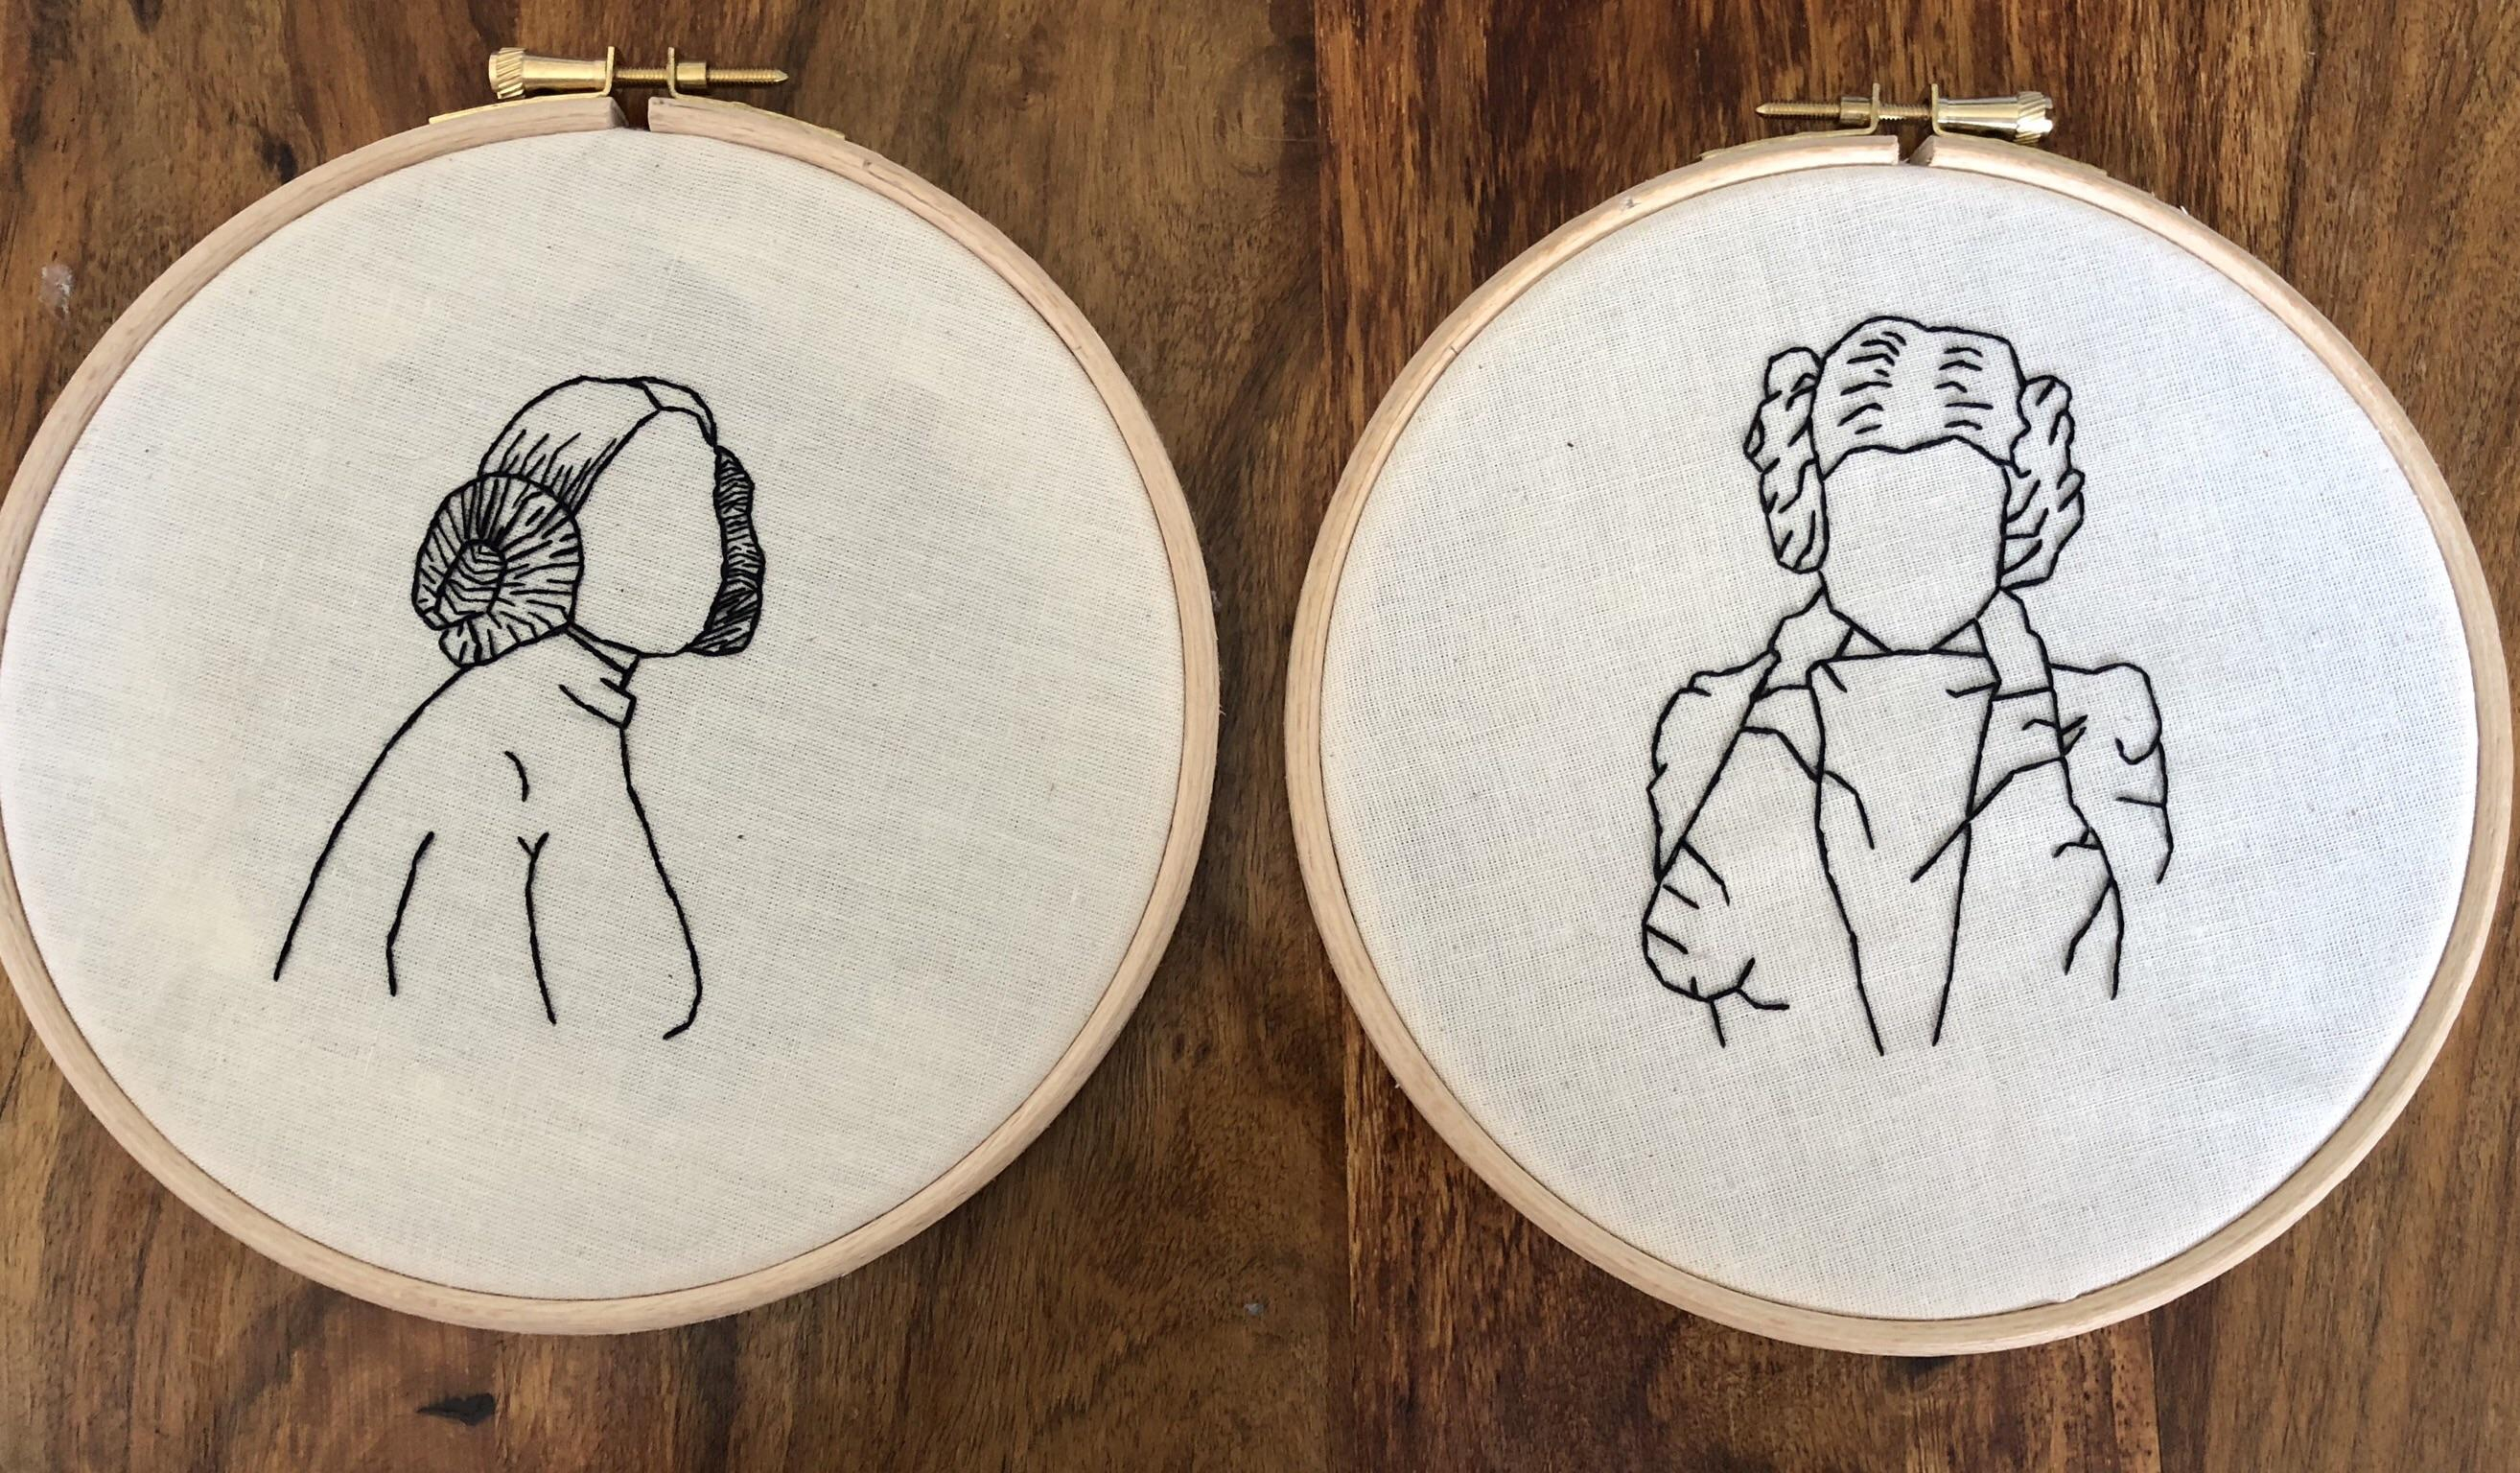 Star Wars Embroidery Pattern Fo I Made My Brother In Law Some Star Wars Themed Pictures As My